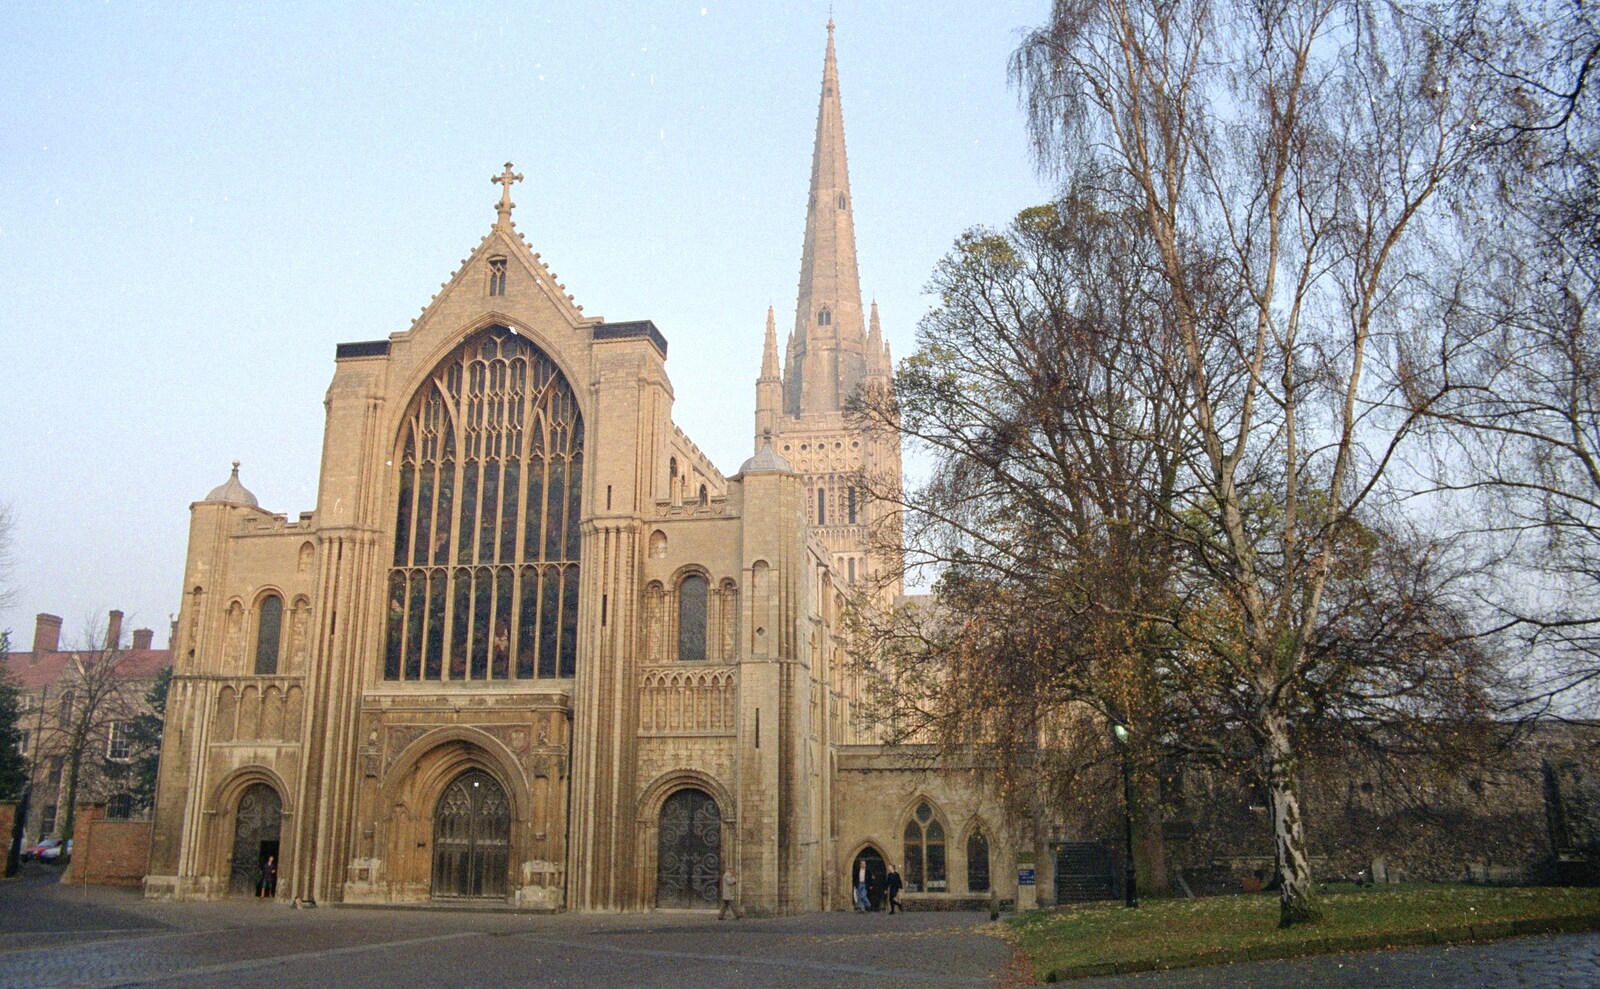 Norwich Cathedral from The Old Man Visits, and a Frosty Stuston, Suffolk - 8th December 1989